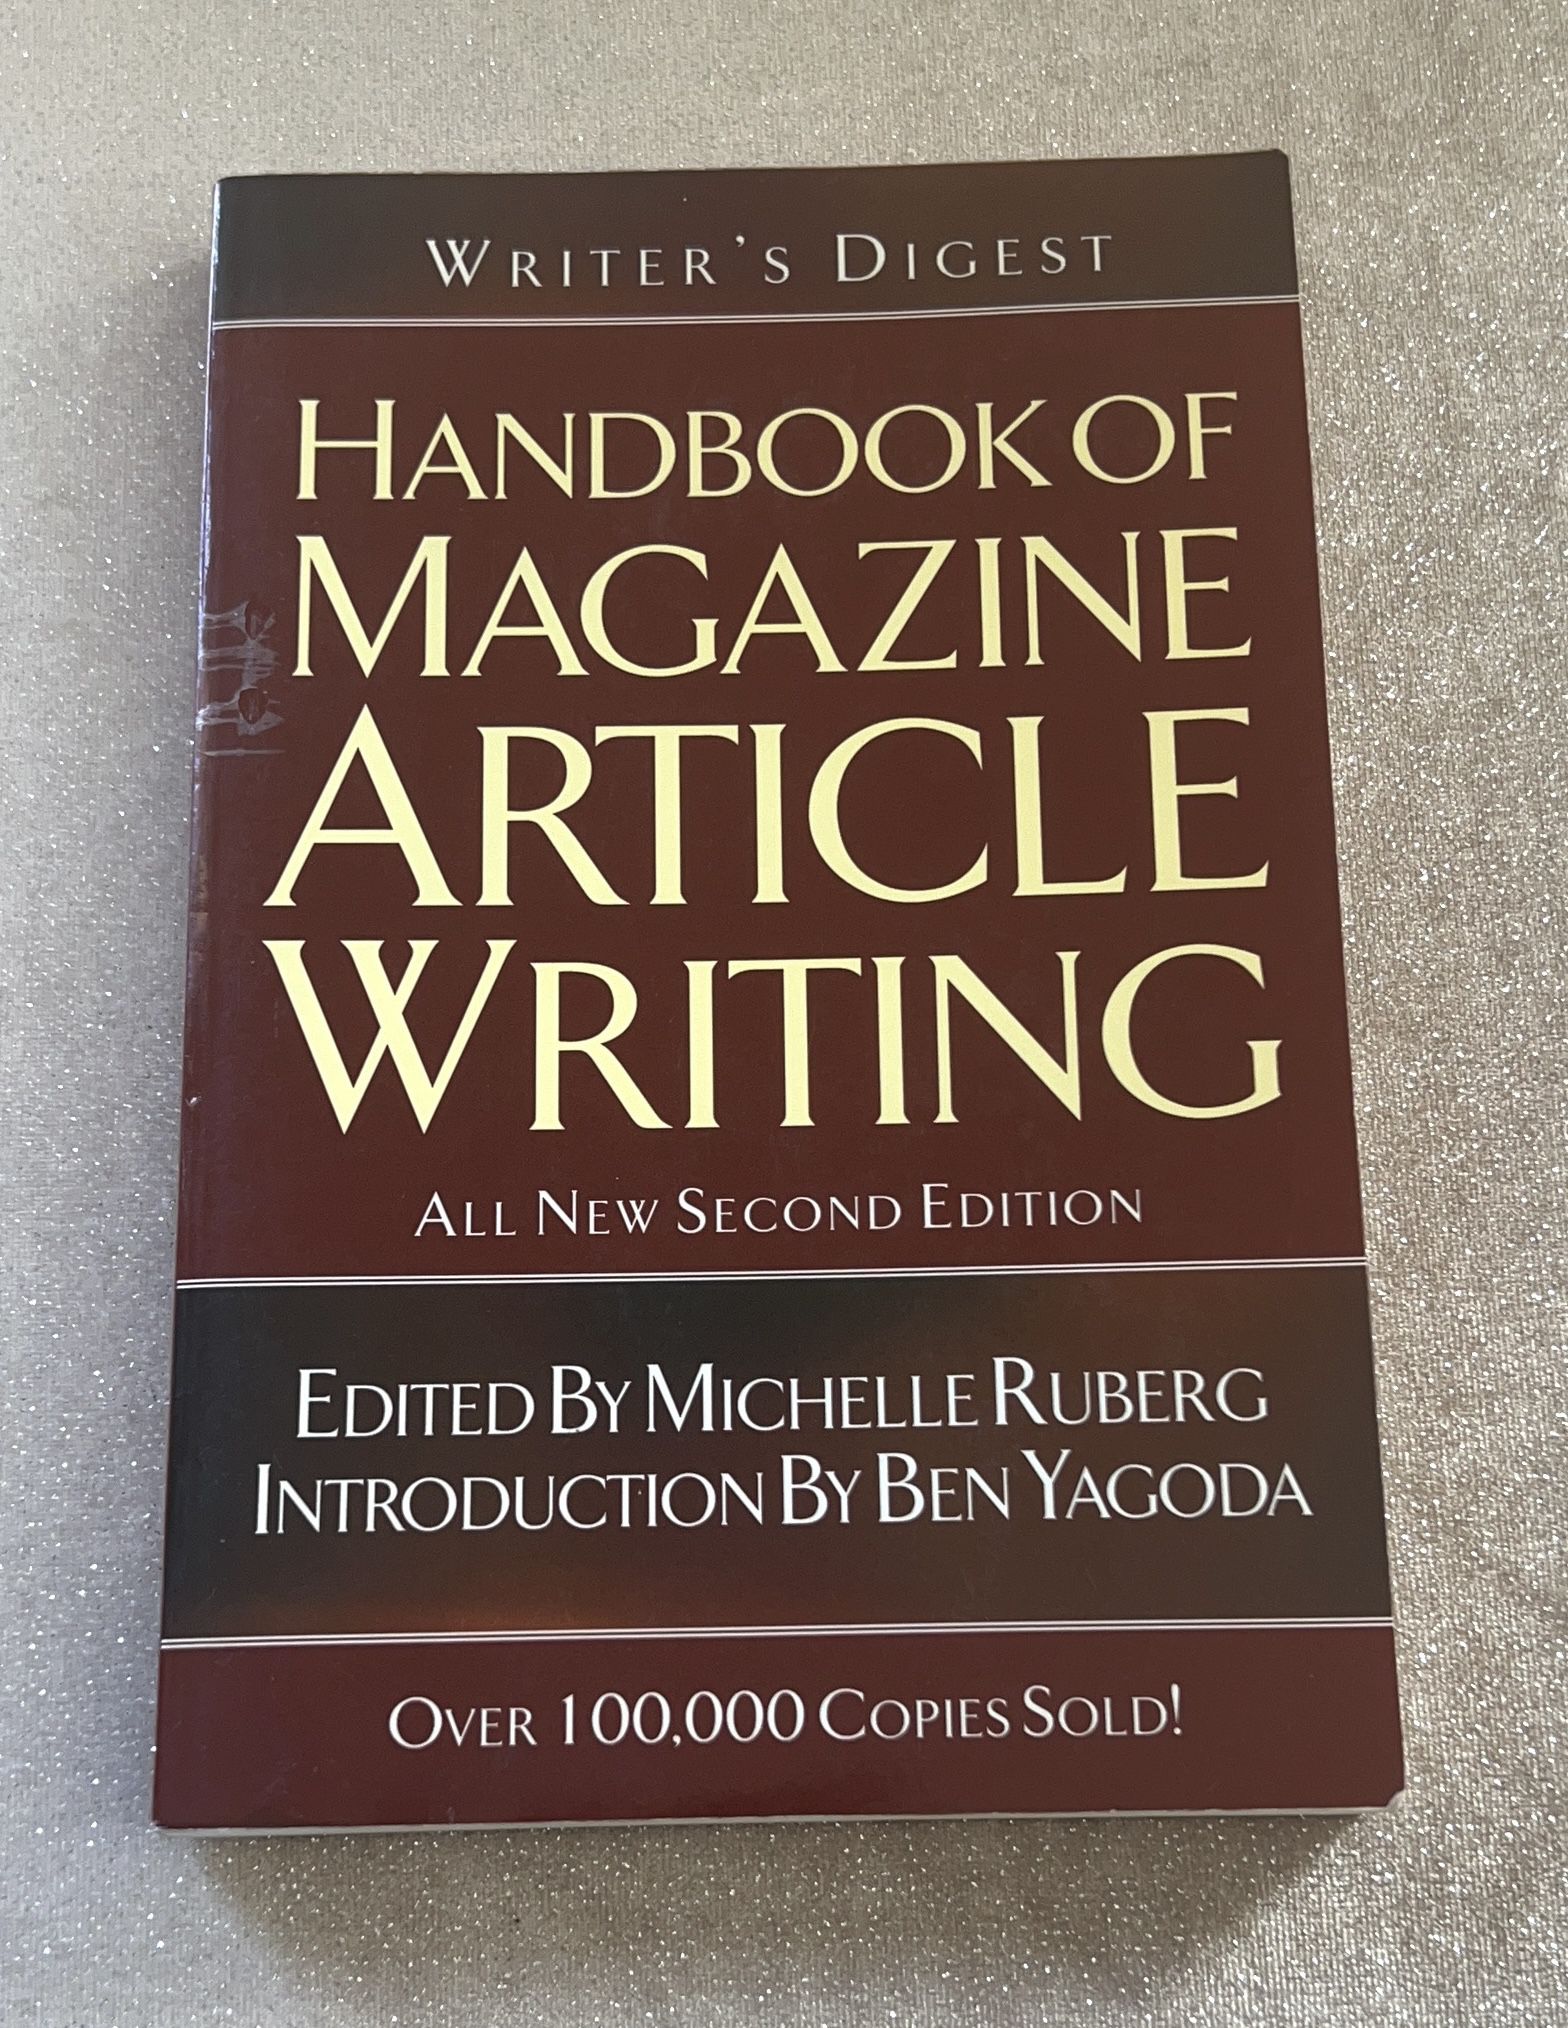 Handbook of Magazine Article Writing 2nd edition by Michelle Ruberg